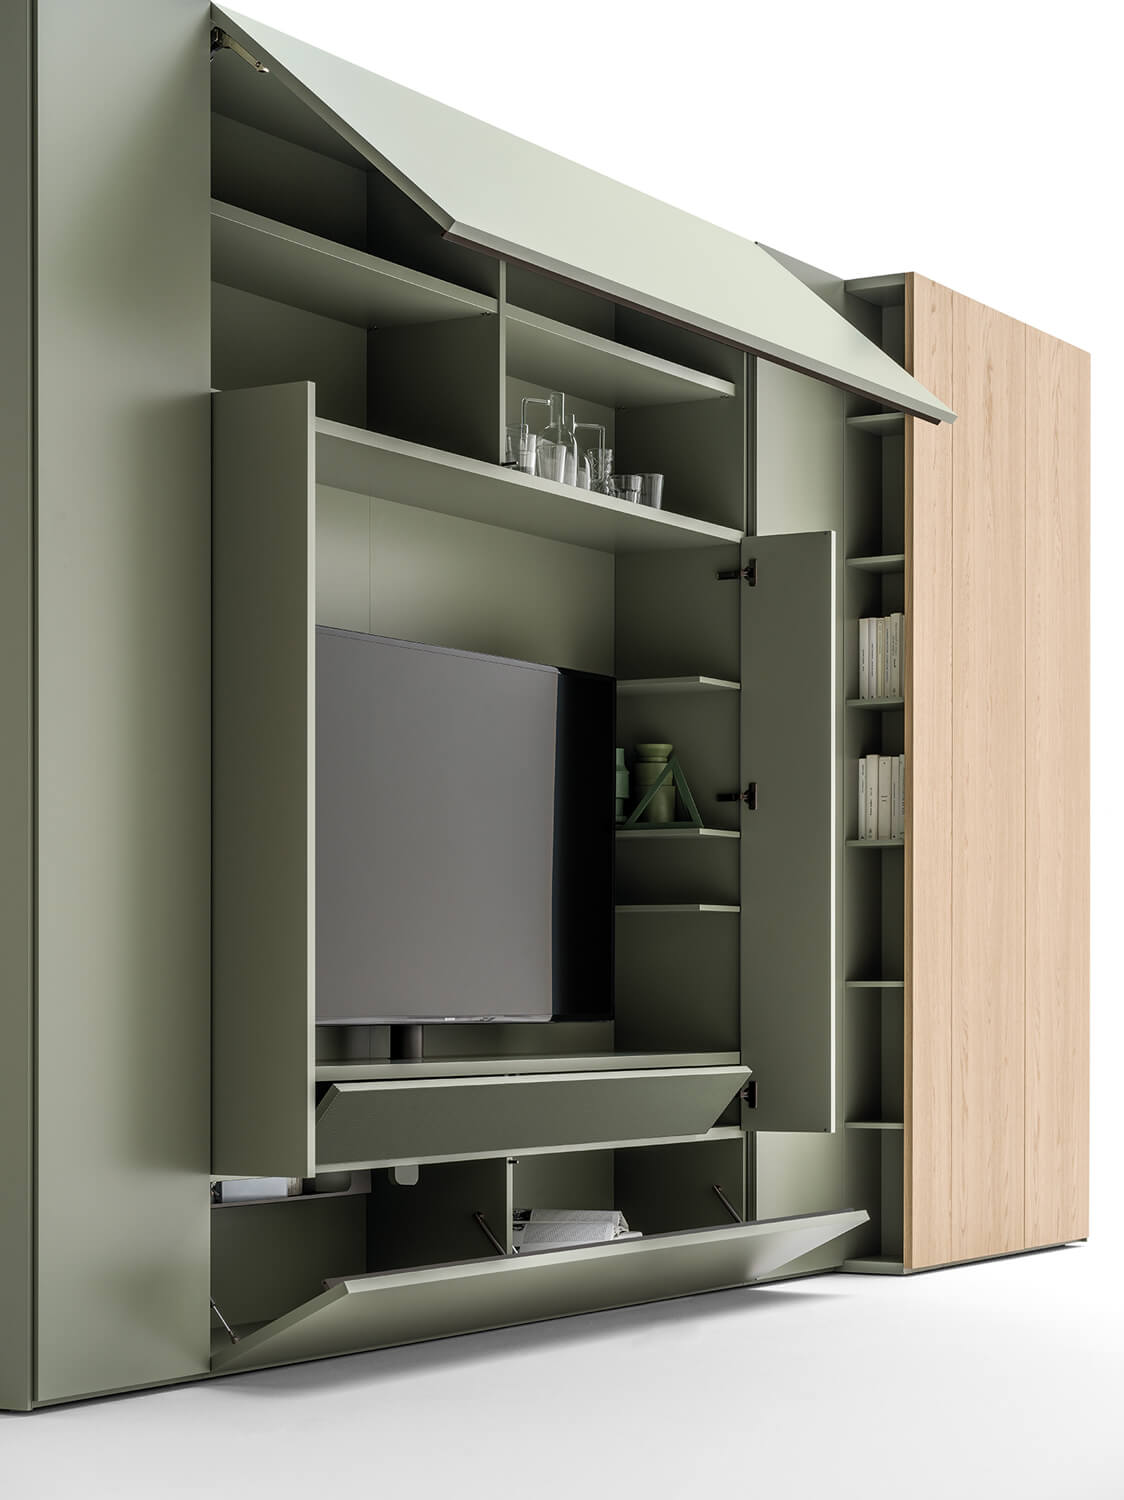 The Roomy TV module can come with or without the media compartment underneath the TV. The TV can sit on its own pedestal or be anchored to a rotating titanium base.